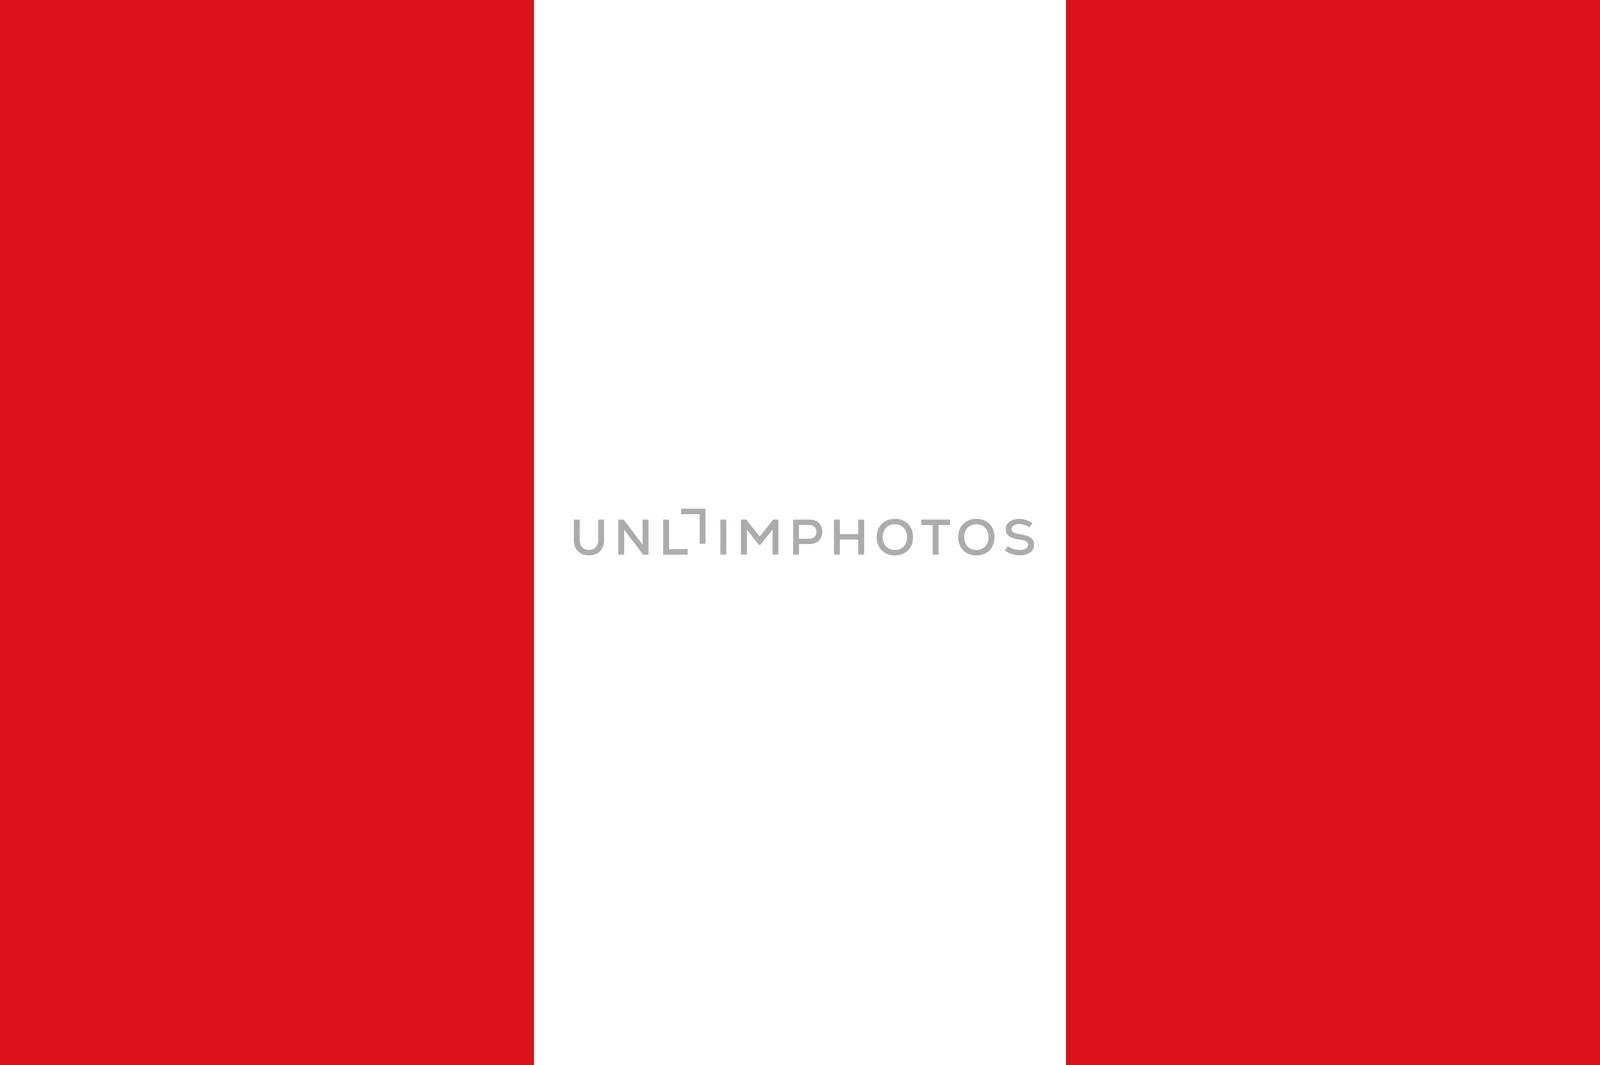 Peruvian flag by paolo77